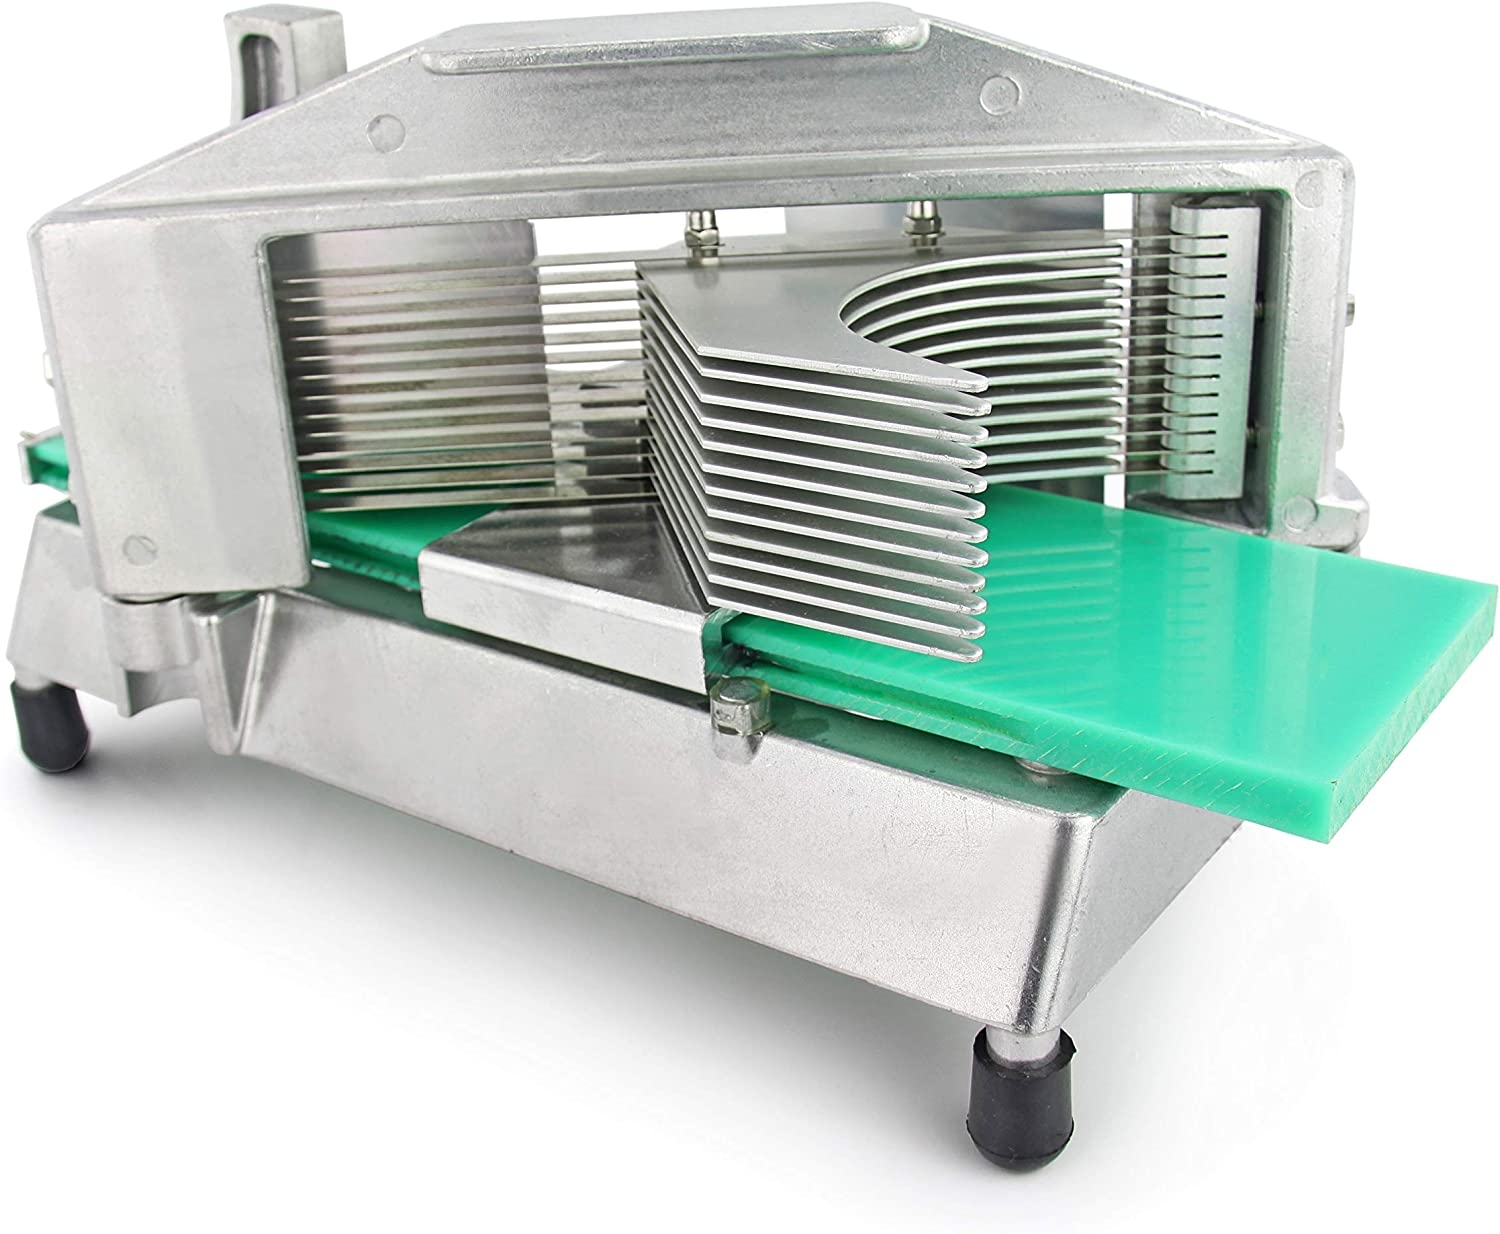 New Star Foodservice 39696 Commercial Tomato Slicer, 1/4-Inch Import To Shop ×Product customization General Description Gallery